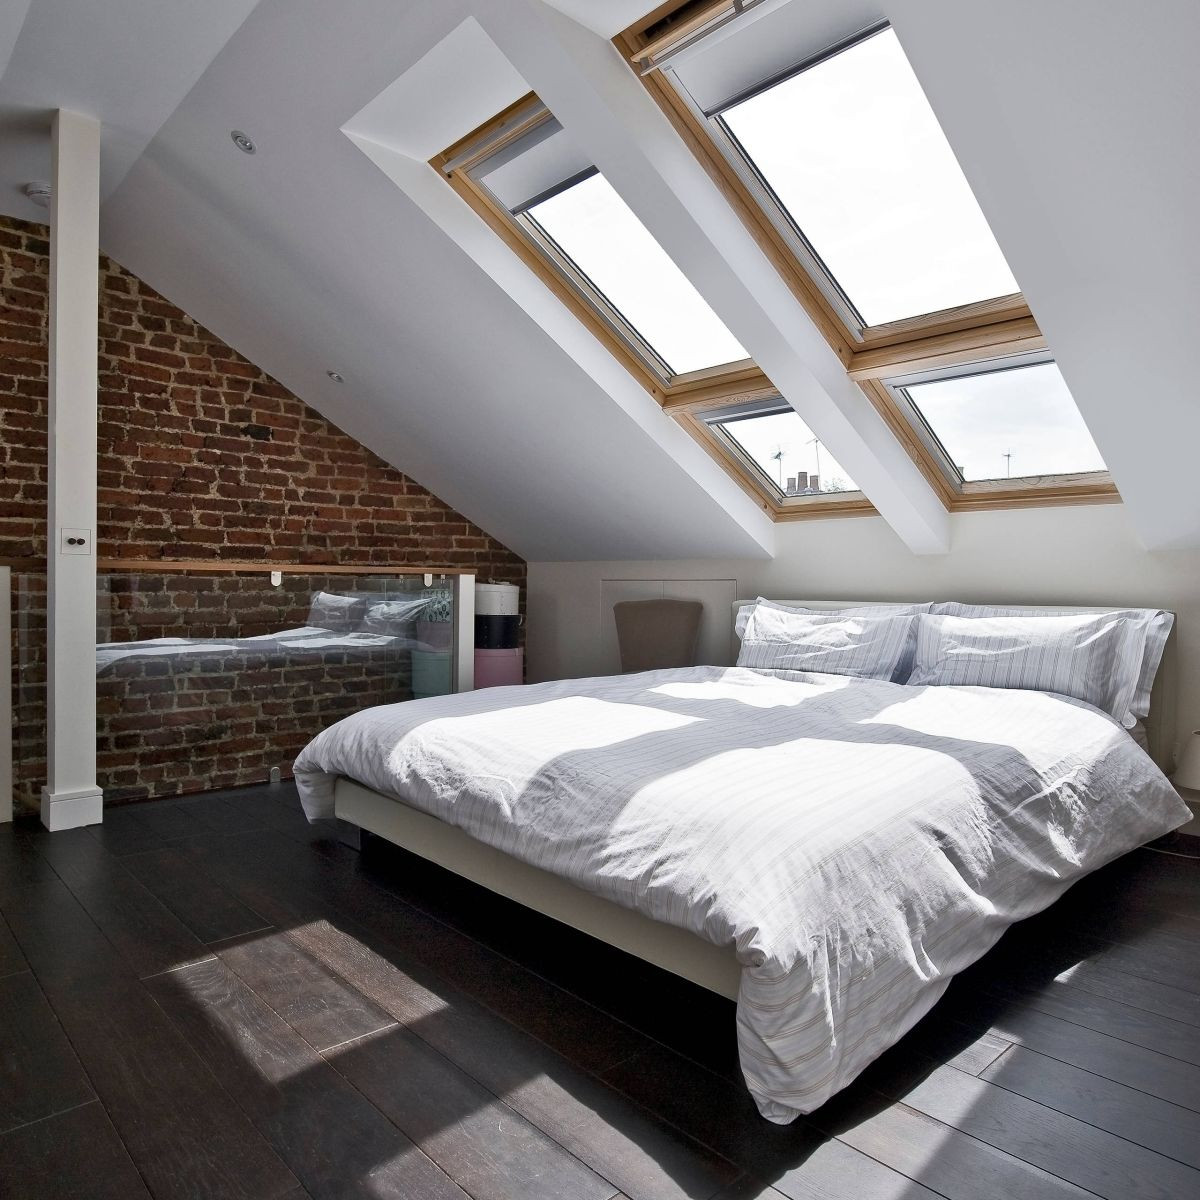 Attic Master Bedroom Ideas
 How To Make The Most of Your Attic Master Bedroom